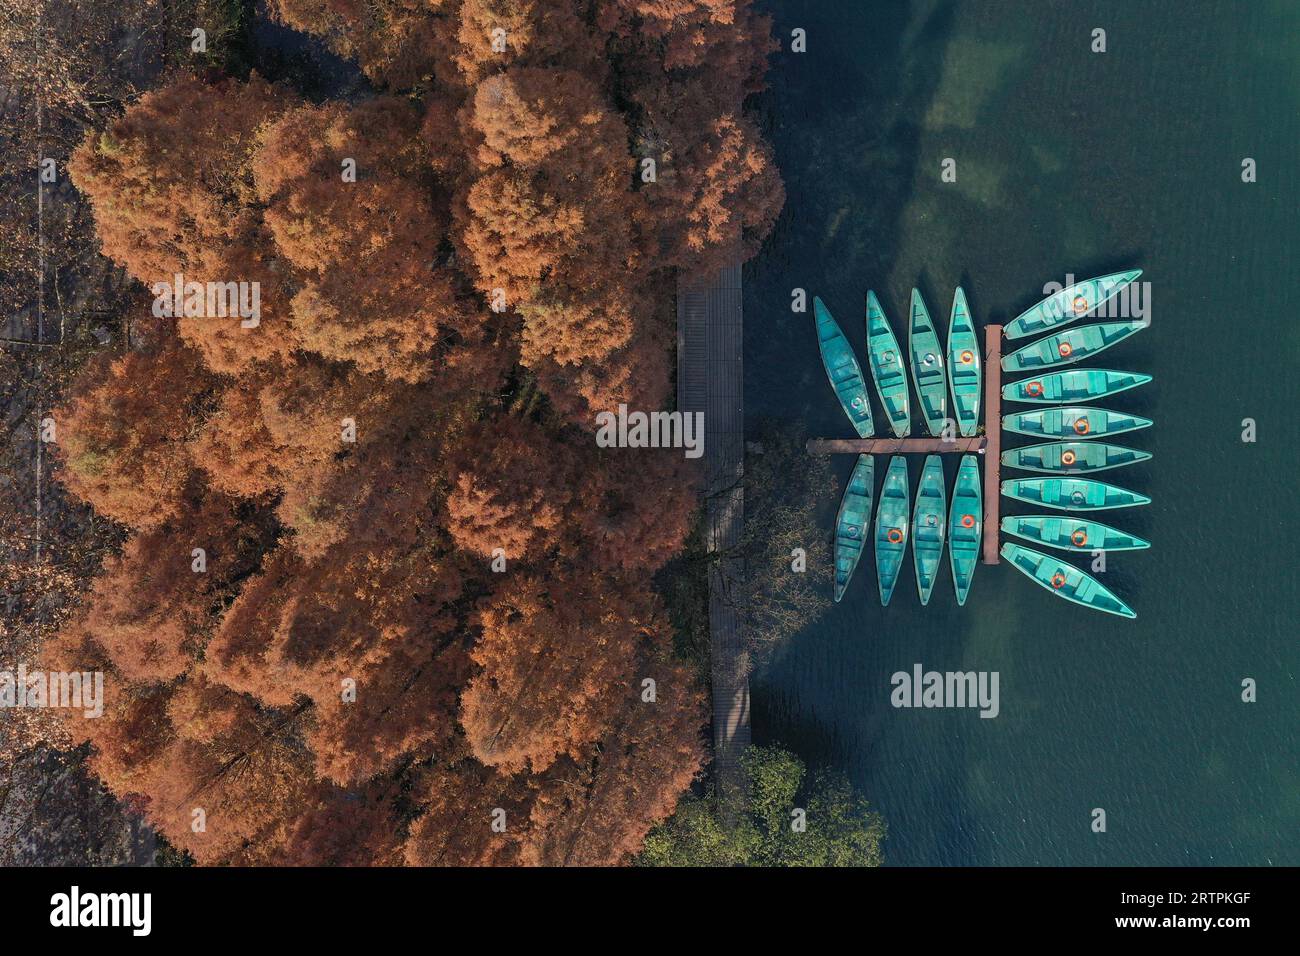 Hangzhou. 13th Dec, 2019. This aerial photo taken on Dec. 13, 2019 shows a view of the West Lake scenic area in Hangzhou, east China's Zhejiang Province. The 19th Asian Games will take place in Hangzhou between September 23 and October 8, featuring a total of 40 sports. It will be the third Asian Games to be hosted in China, after Beijing 1990 and Guangzhou 2010. The highly anticipated Asian Games can help boost the popularity of Hangzhou where history and modernity co-exist and further promote its culture. Credit: Huang Zongzhi/Xinhua/Alamy Live News Stock Photo